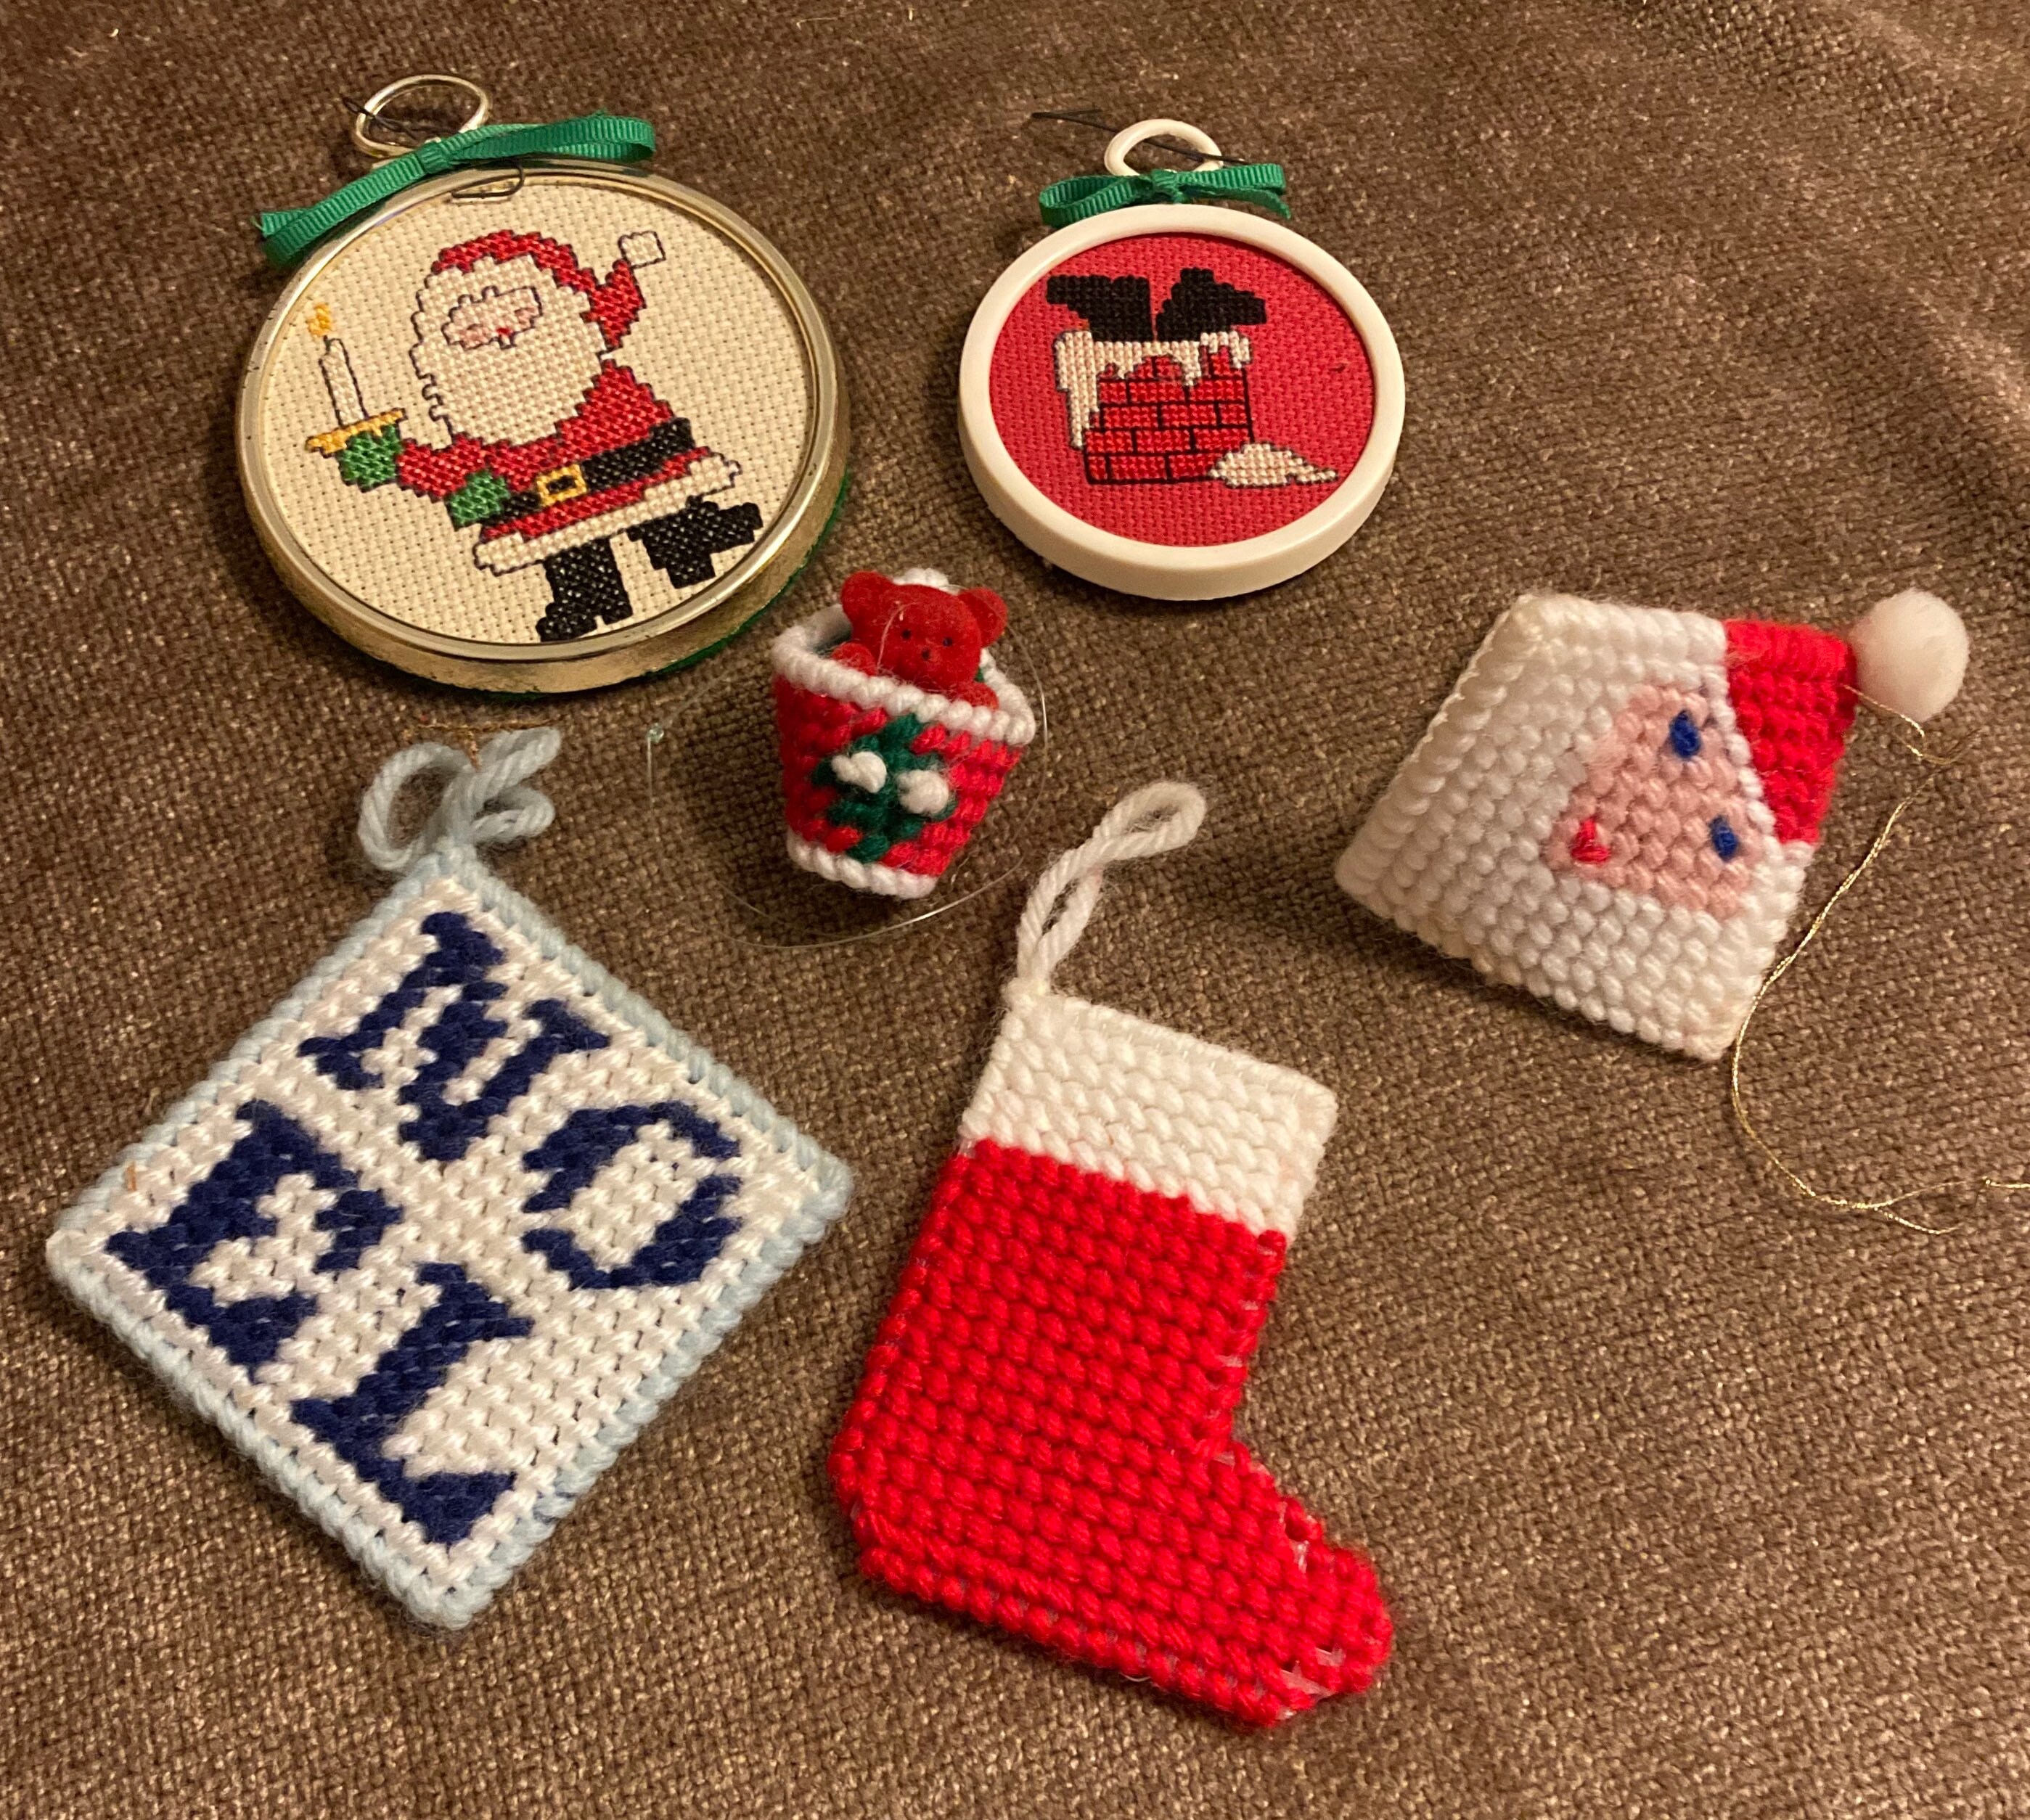 Vintage Cross Stitch Christmas Ornaments - Lot of 11 - Skaters